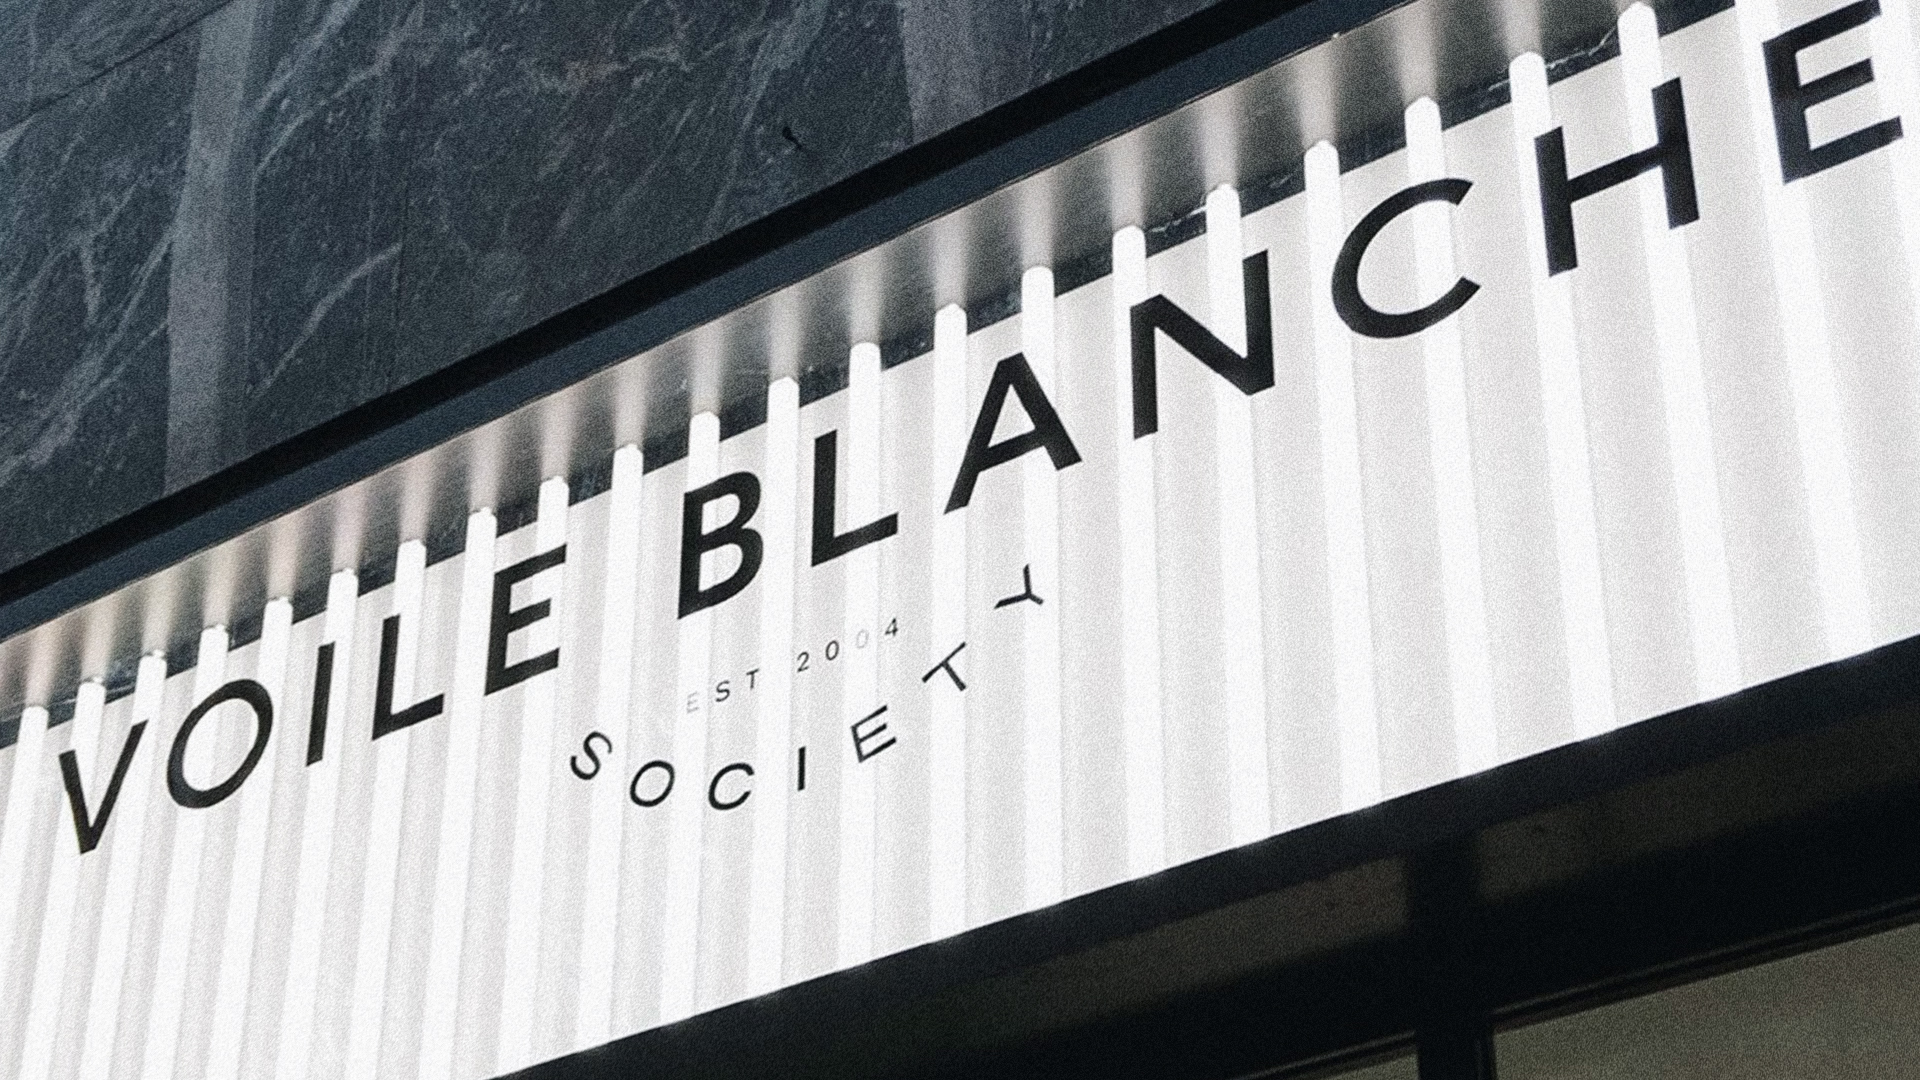 Voile Blanche Society